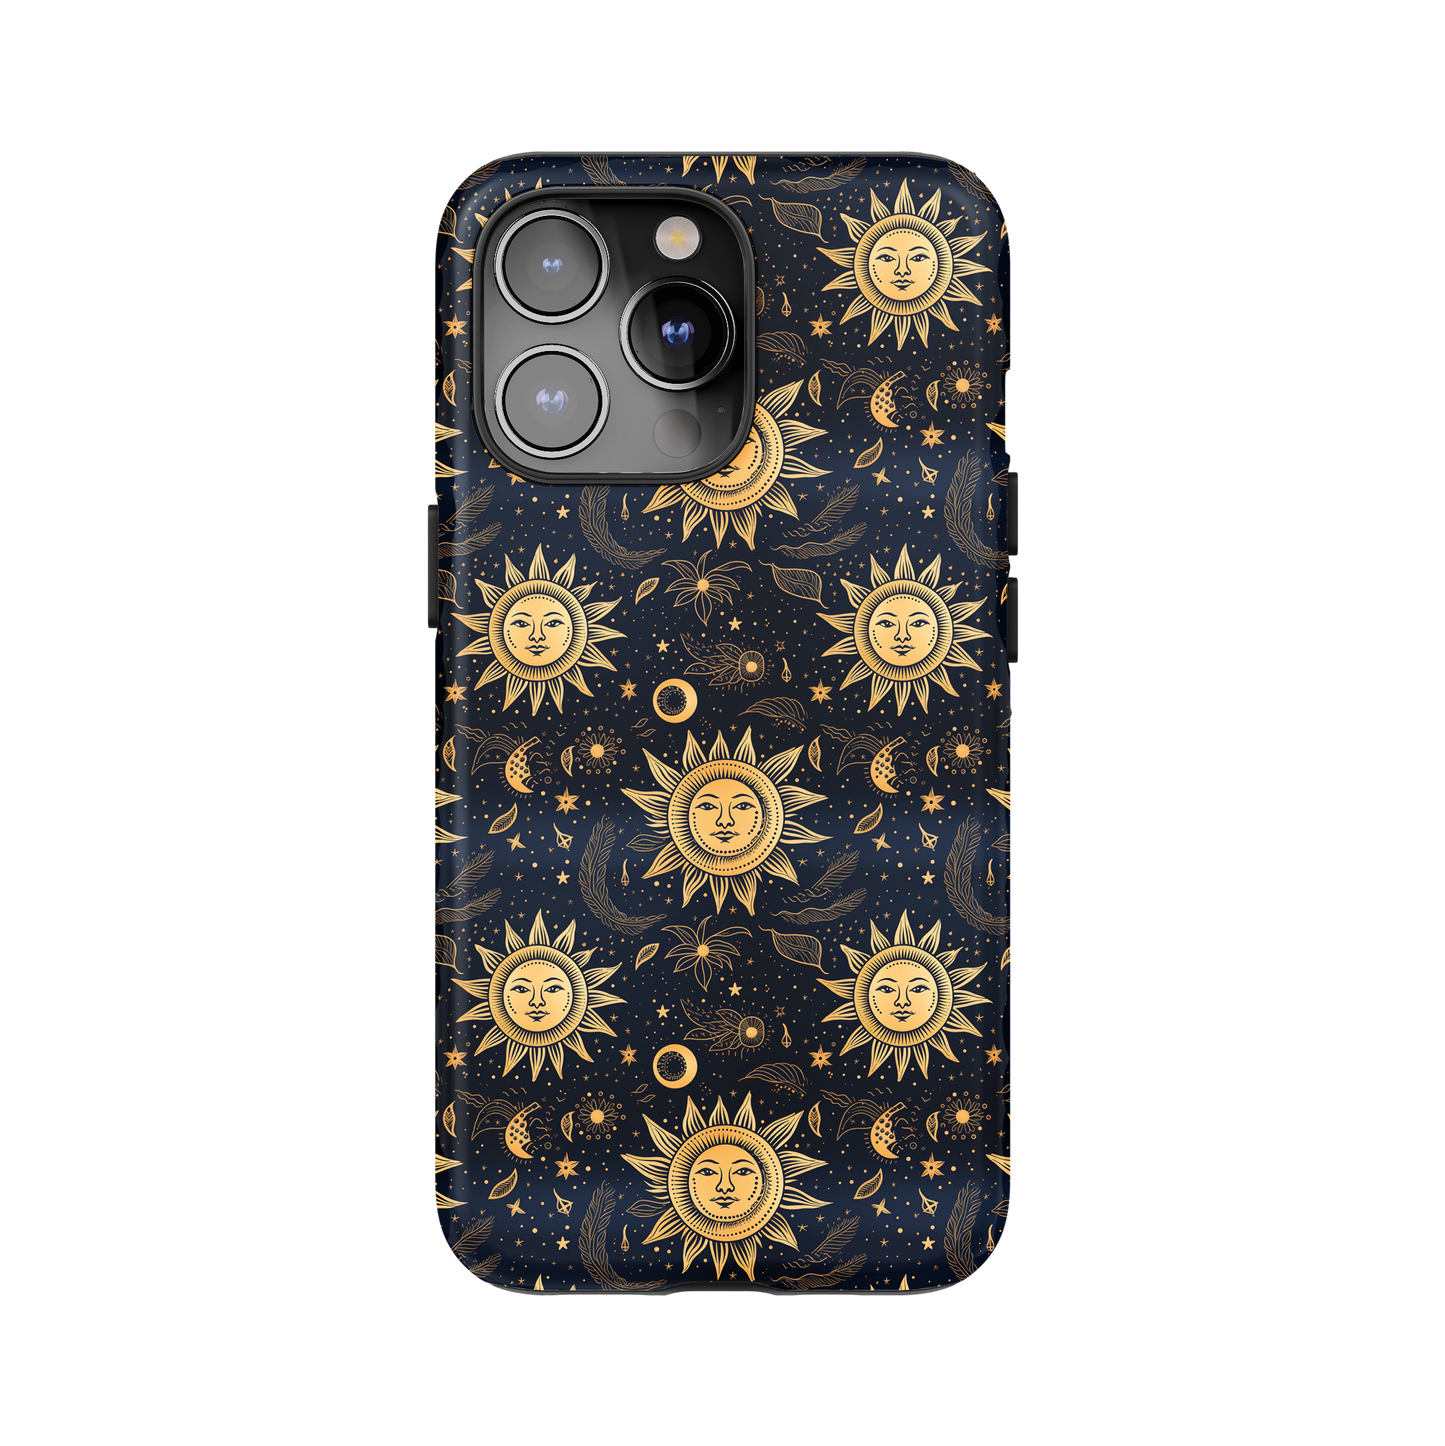 Celestial Suns Phone Case for iPhone and Samsung